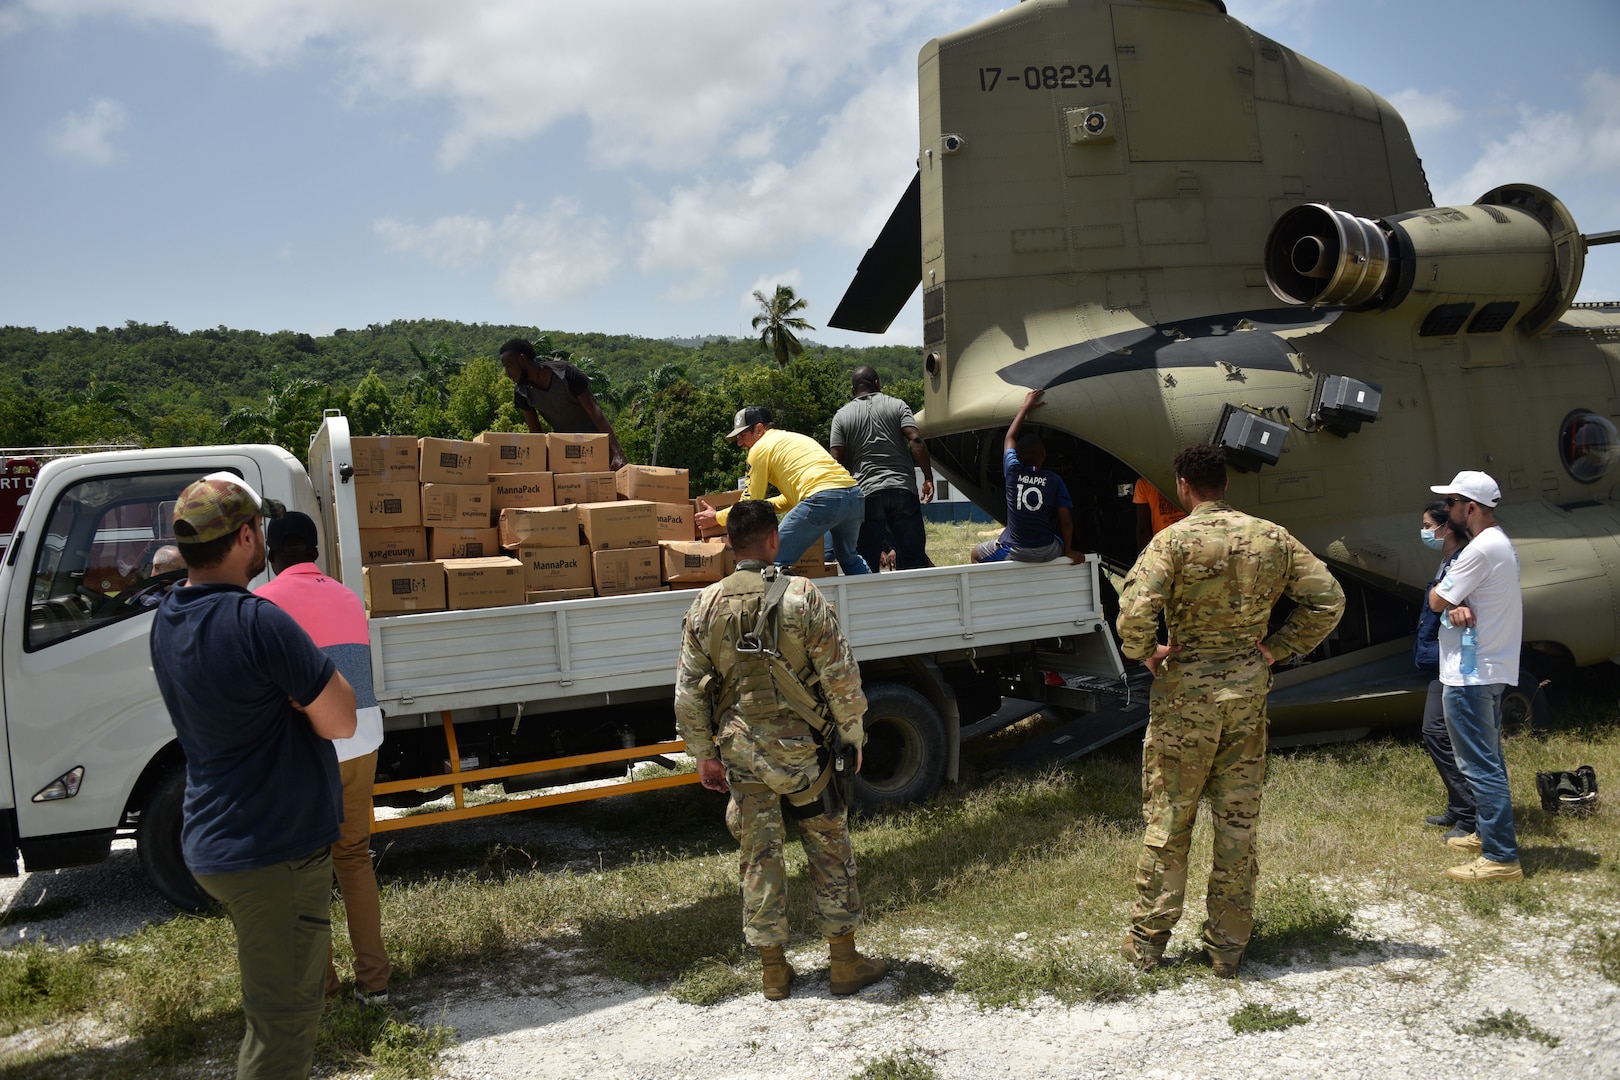 People unload boxes from the cargo hold of a helicopter into a truck.